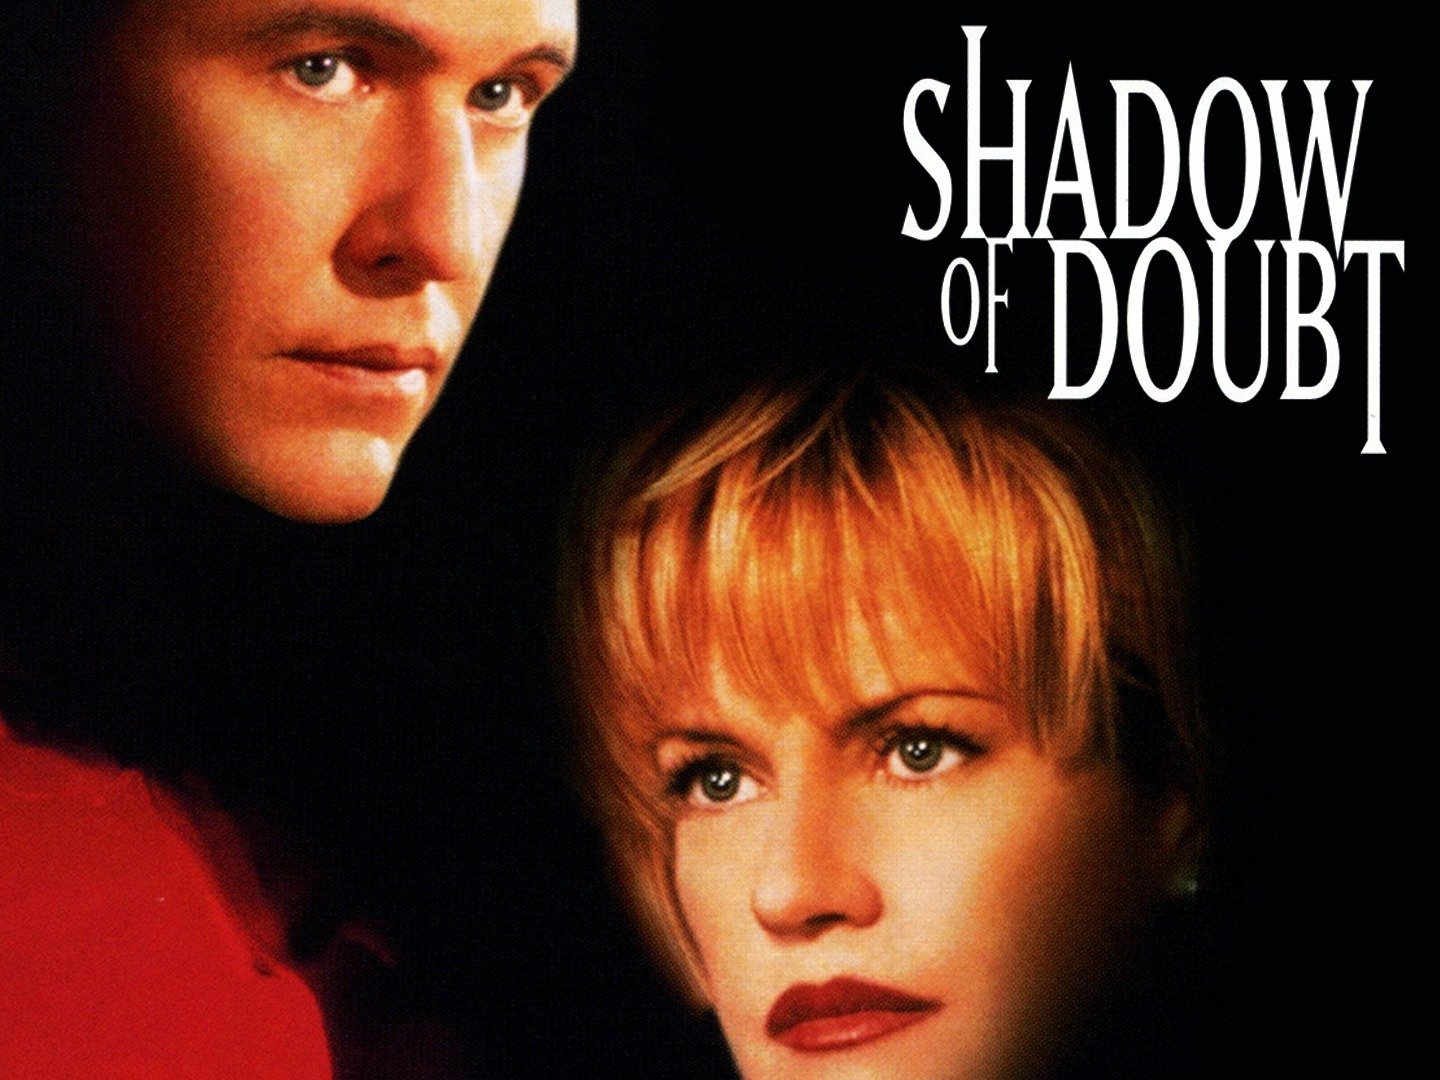 shadow of a doubt full movie online